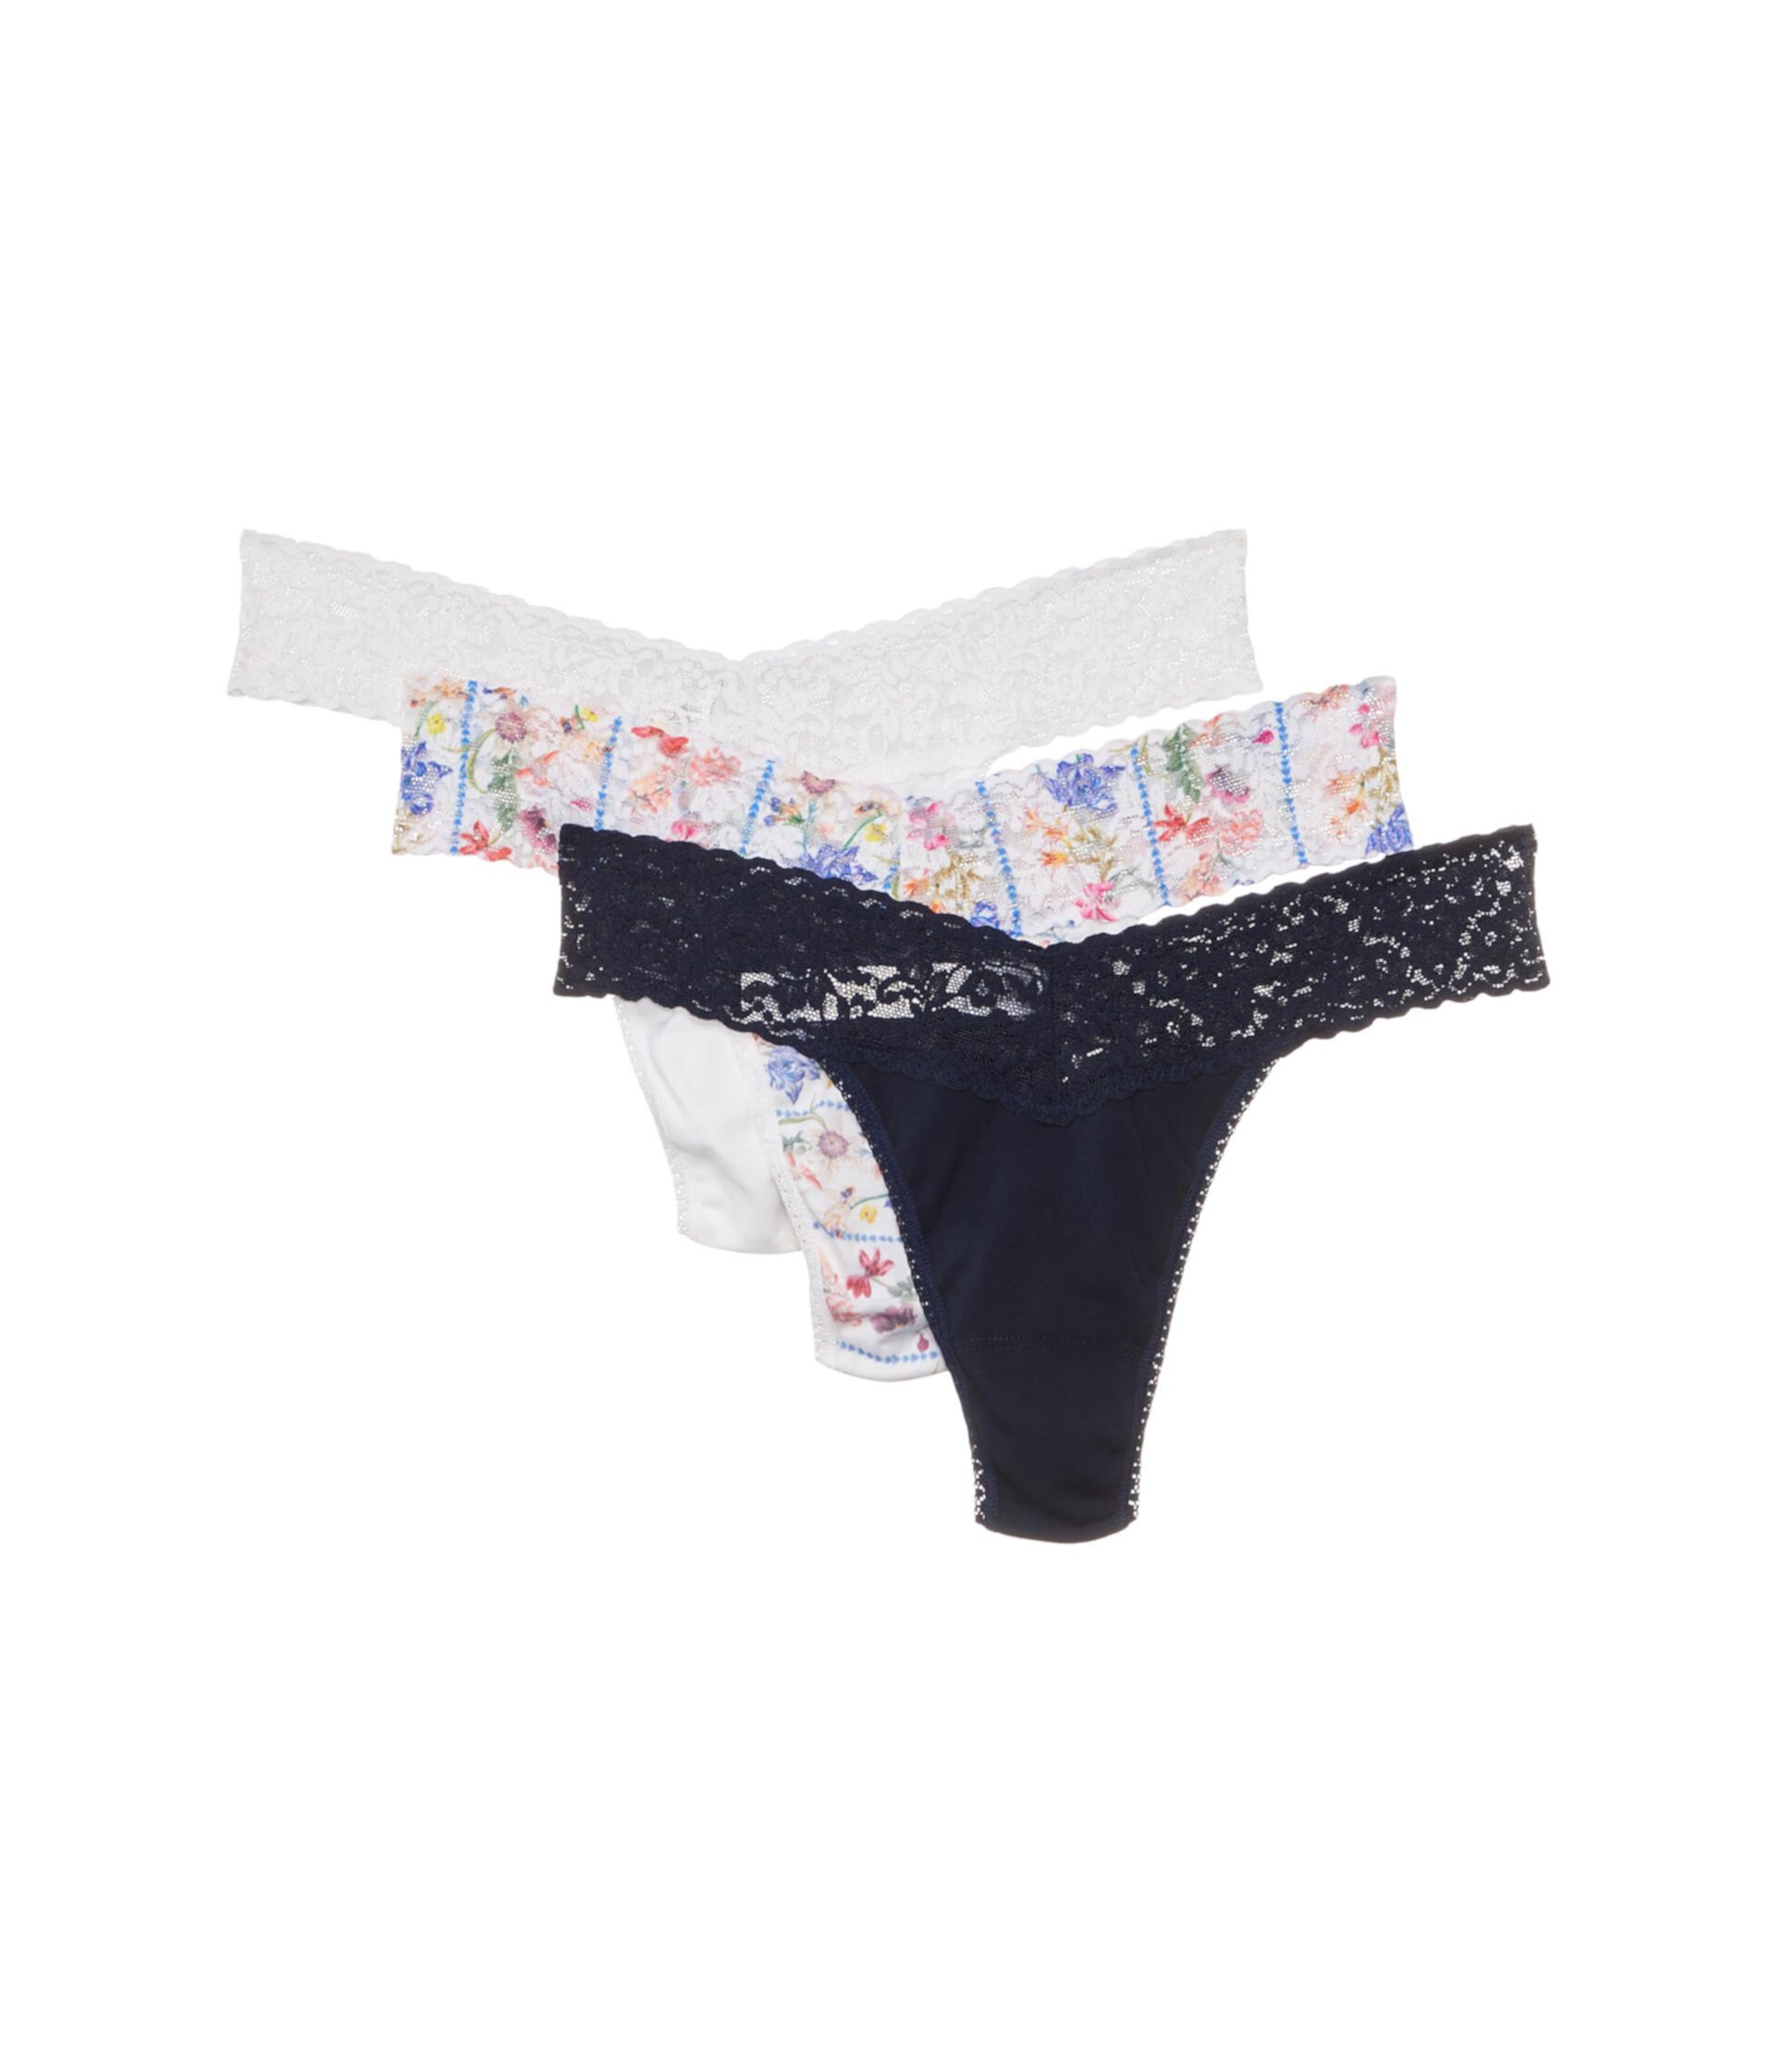 Cotton Printed French Brief Hanky Panky